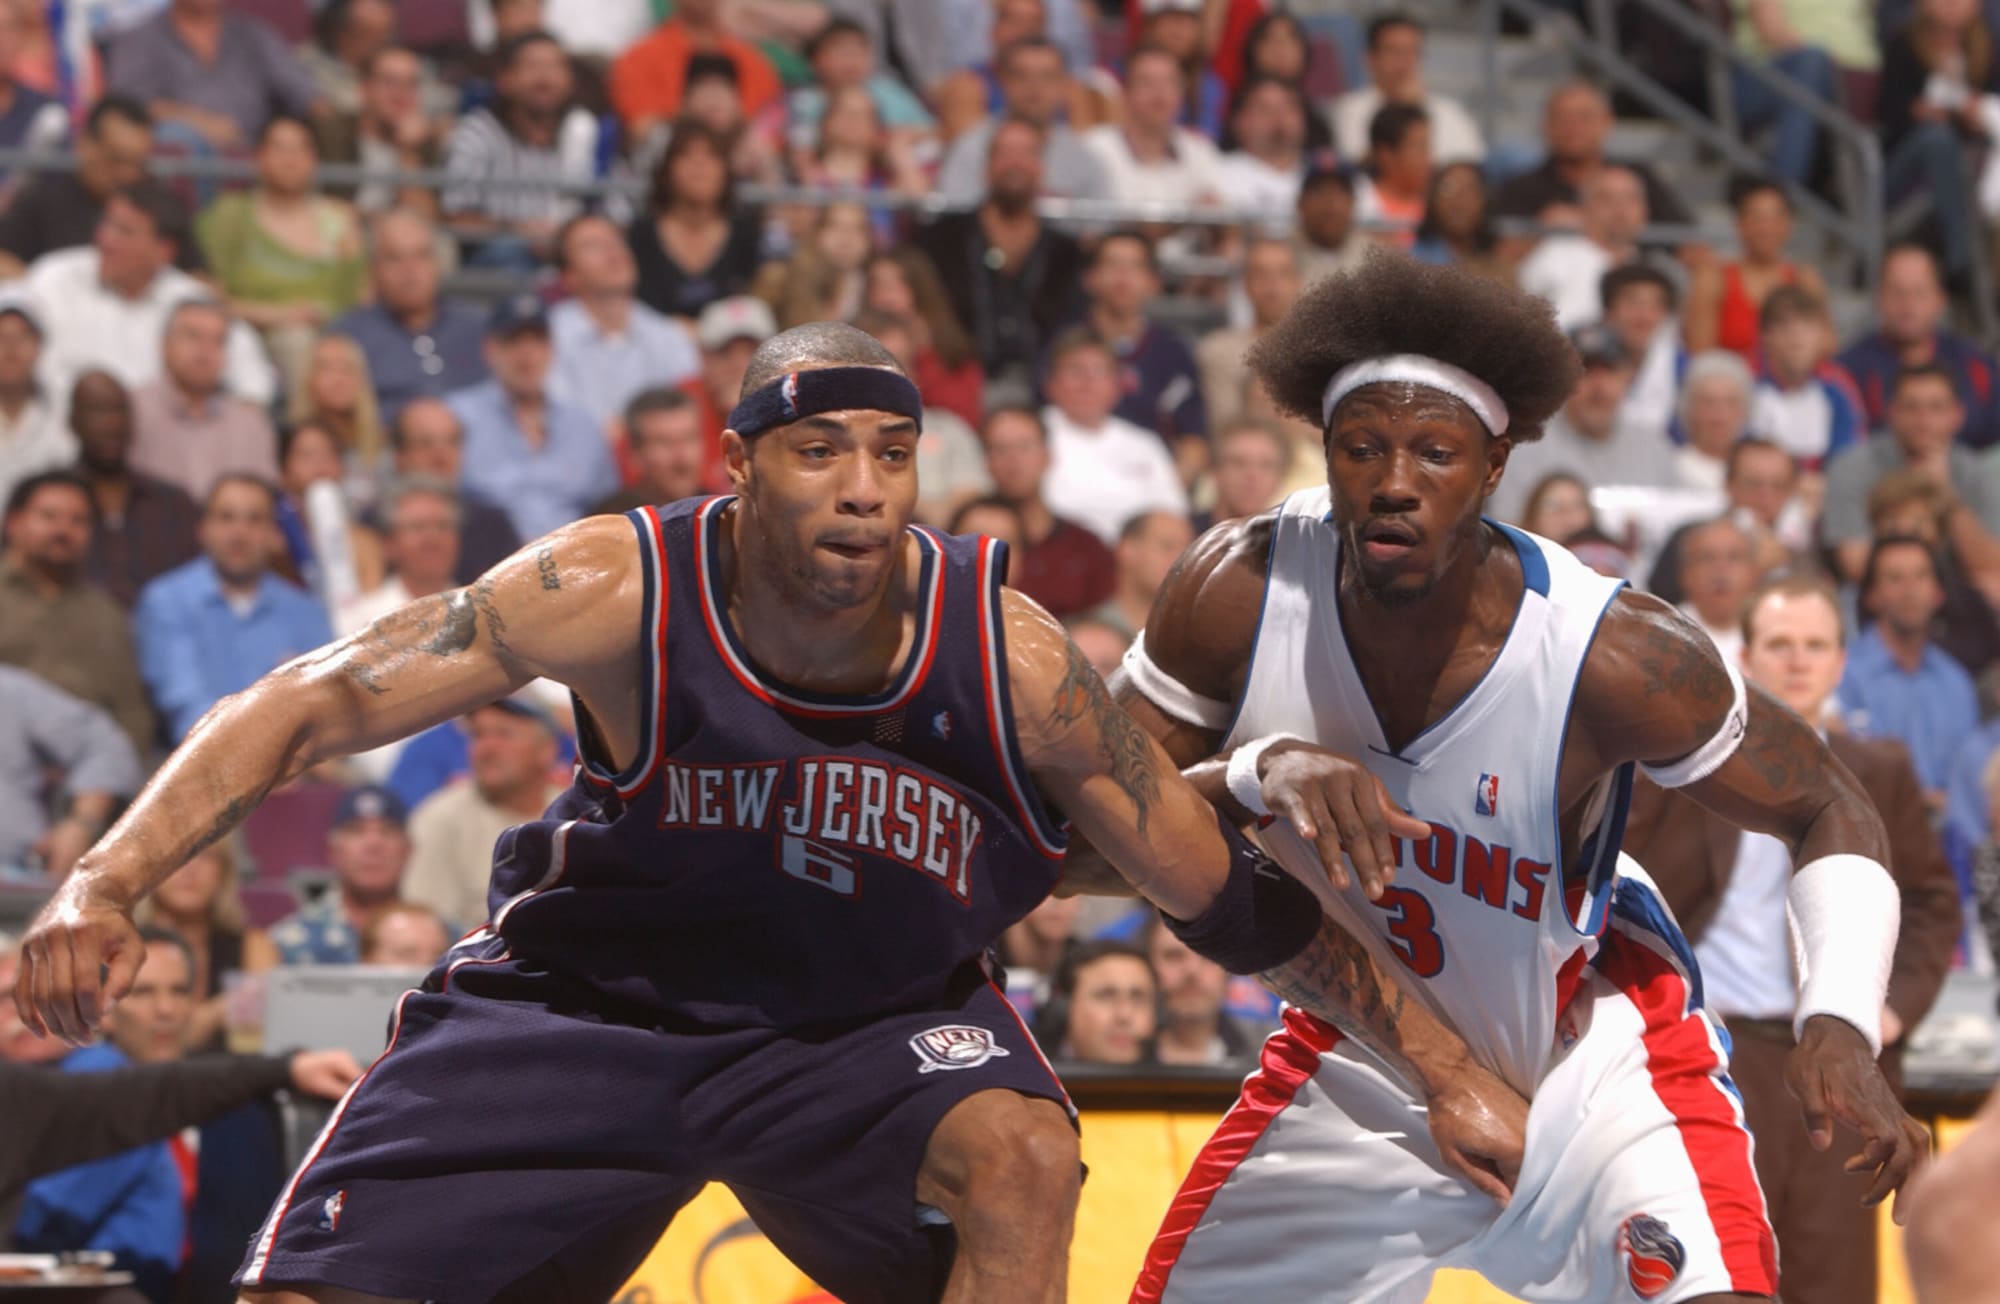 Remembering Jason Kidd's Better Days with the Nets Franchise